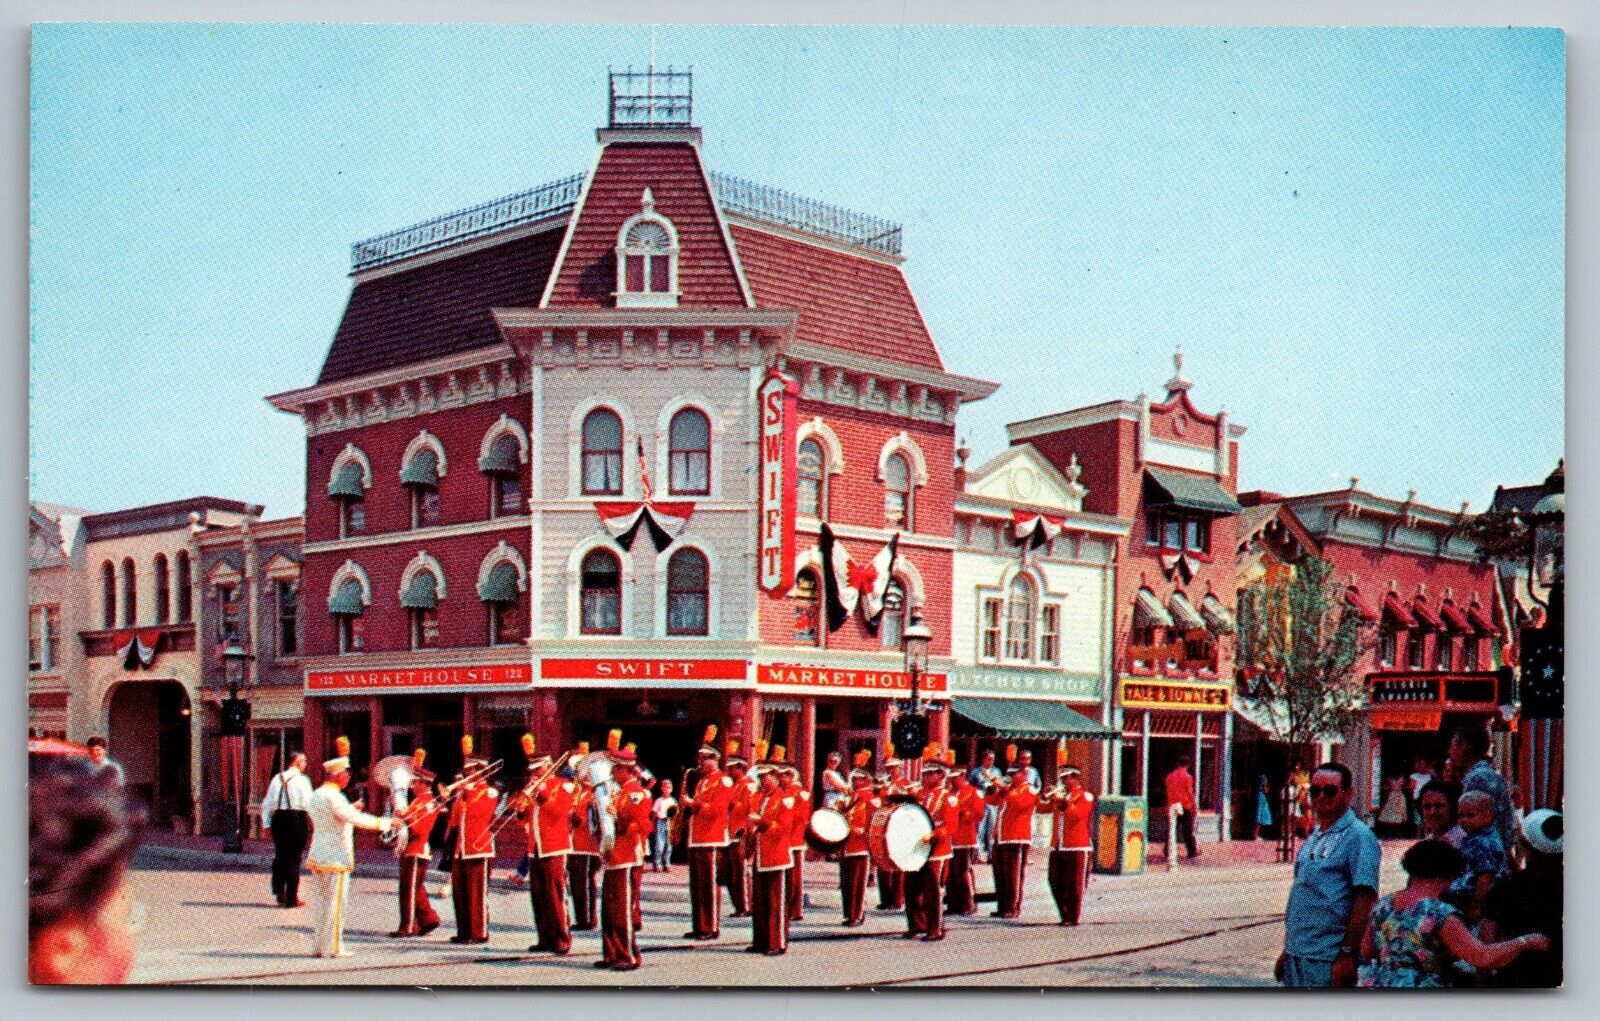 Disneyland Band Plays in Front of Swift's Market House California Postcard c1955